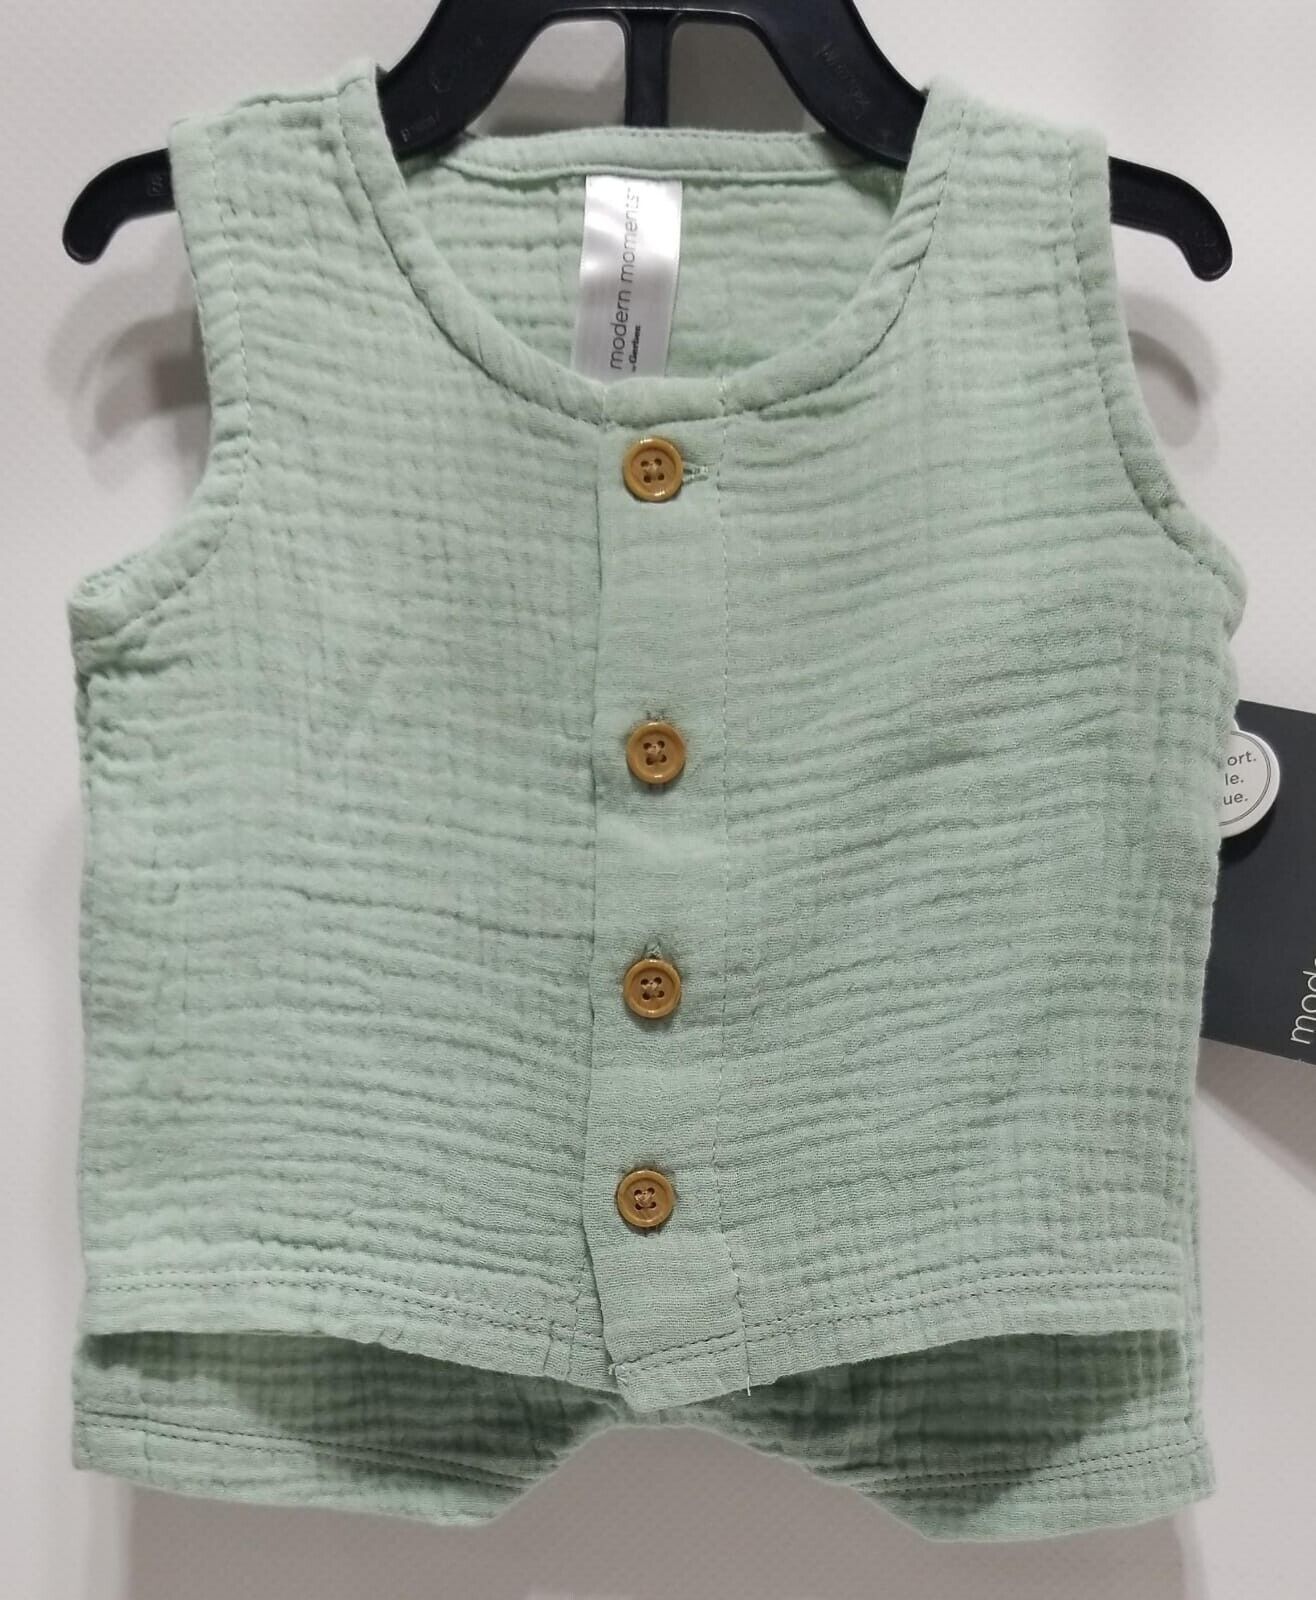 Primary image for Modern Moments by Gerber Baby Boy Top and Short Outfit Set, Green Size 18M